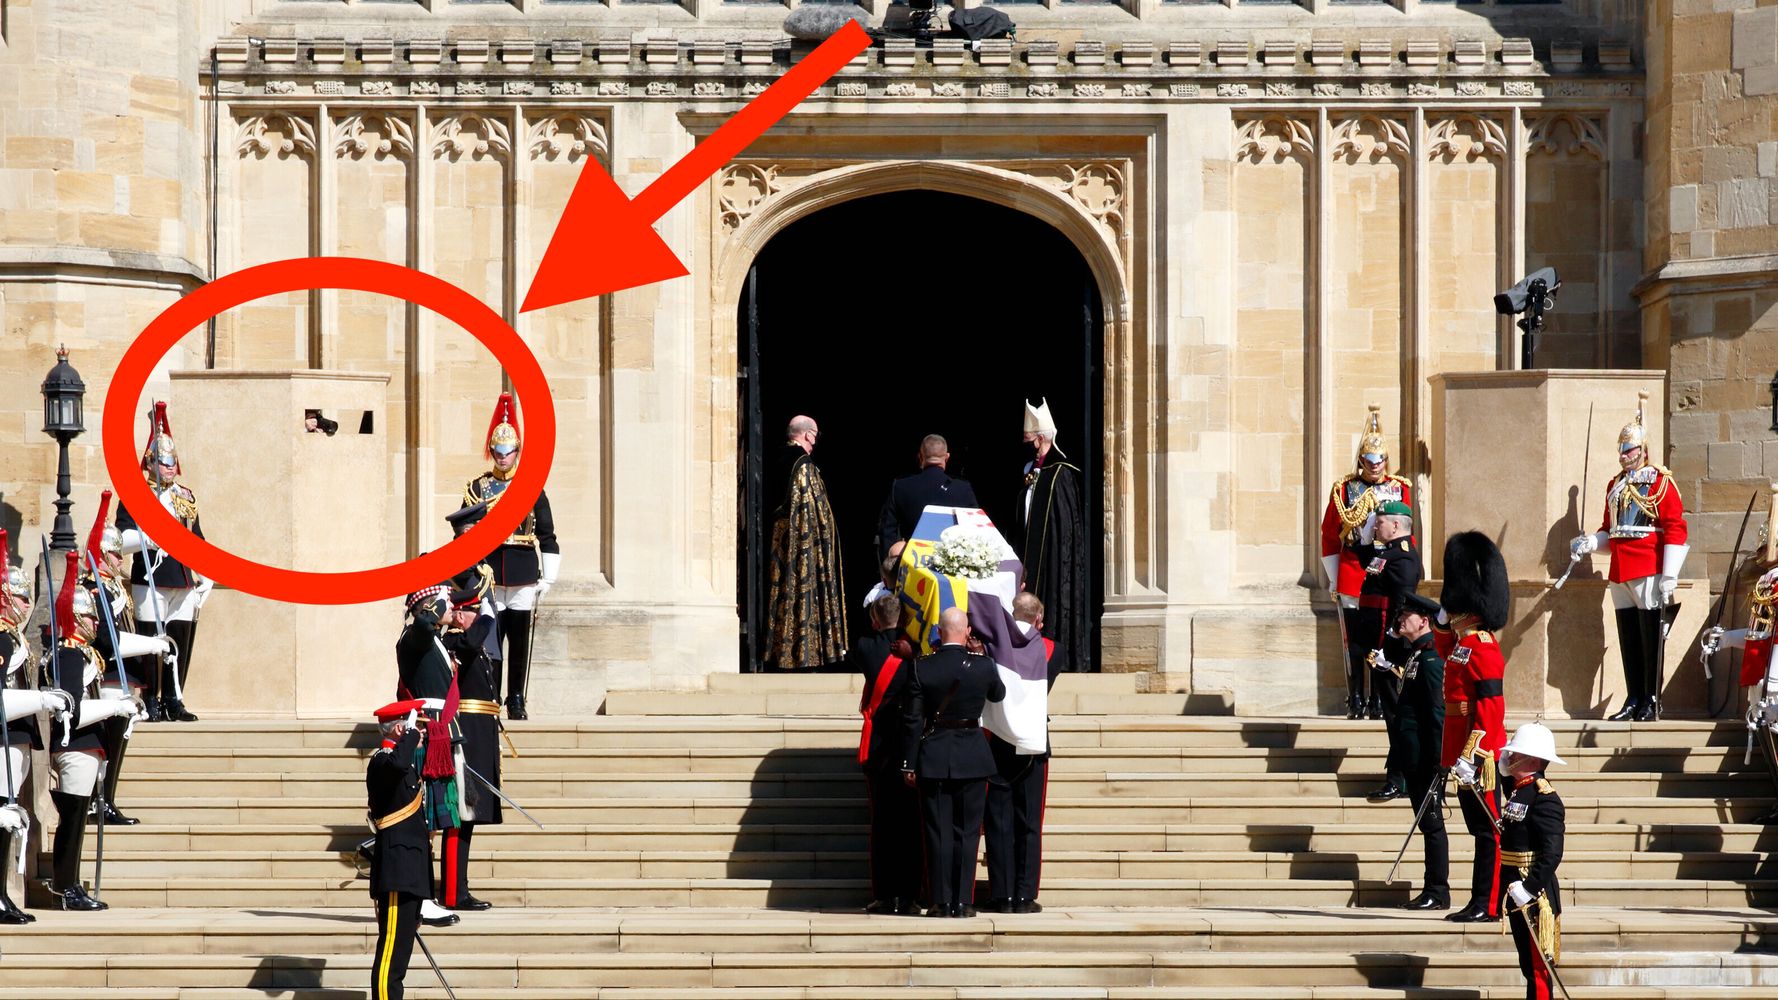 The photographer reveals how he covered Prince Philip’s funeral in the most discreet way